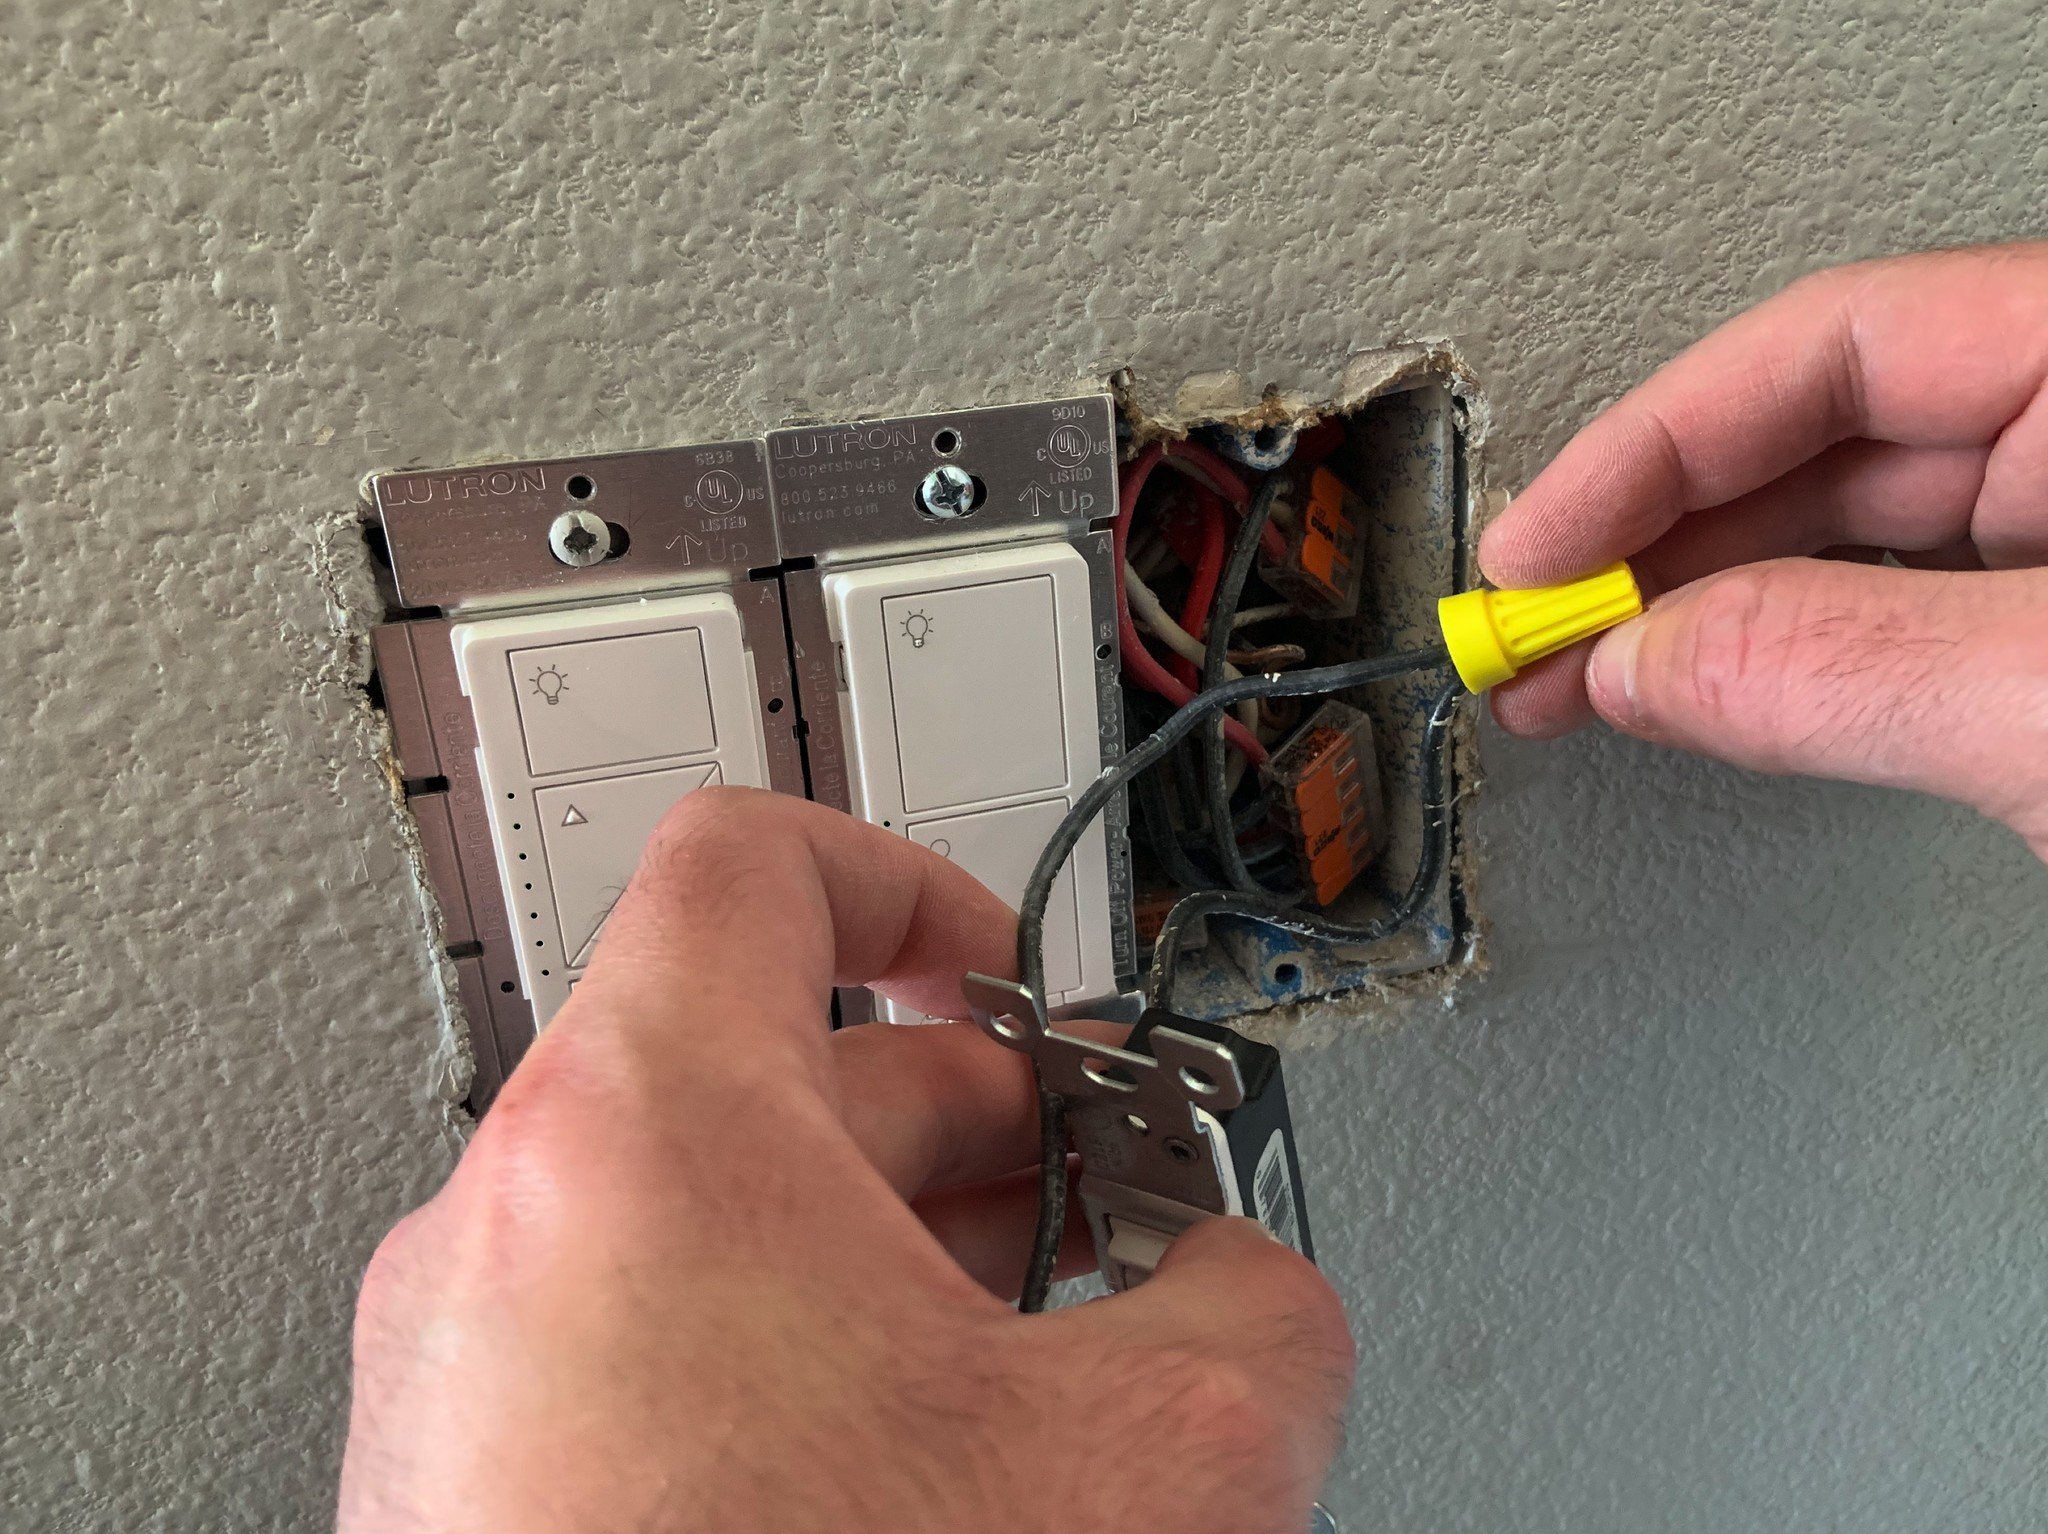 Installing a HomeKit-enabled light switch